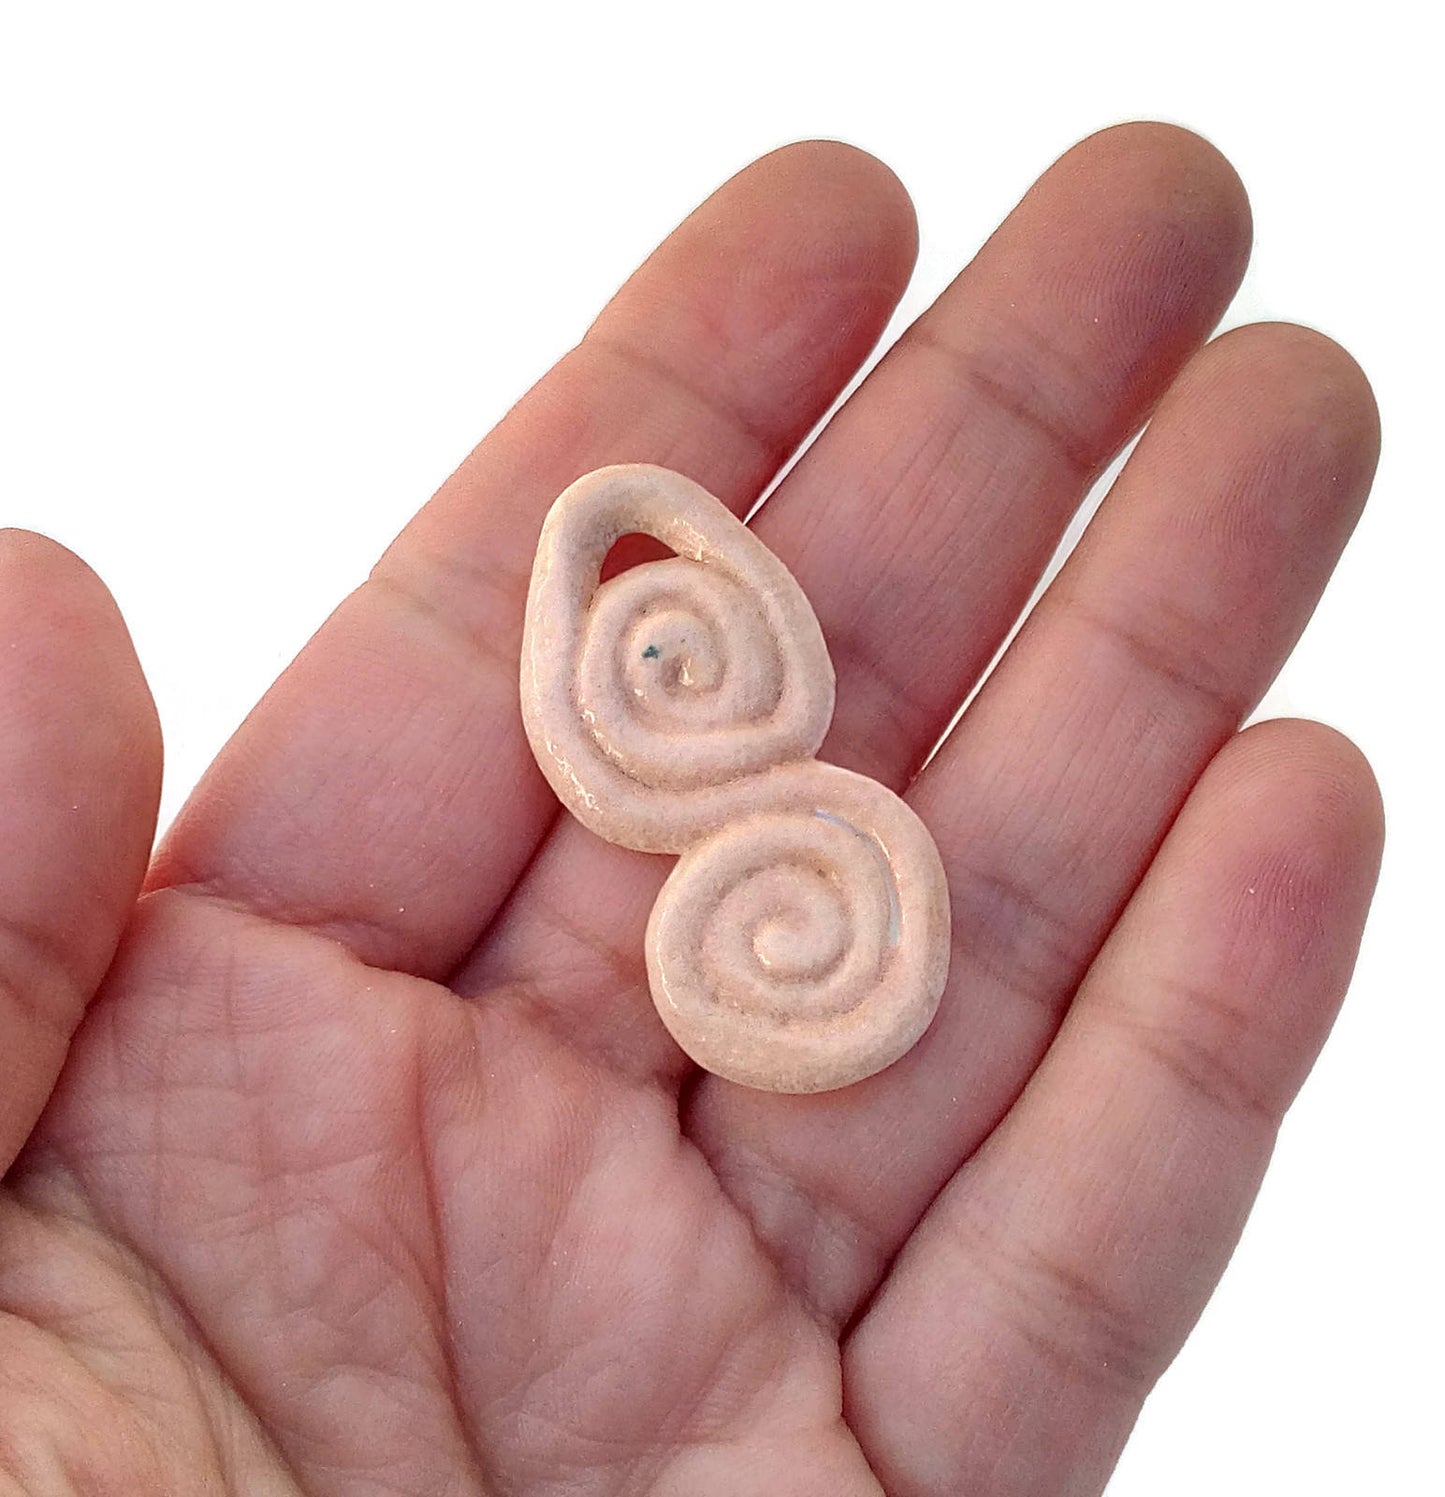 1Pc 40mm Extra Large Handmade Ceramic Necklace Pendant For Jewelry Making, Unique Artisan Clay Charms Infinity Design For Women - Ceramica Ana Rafael